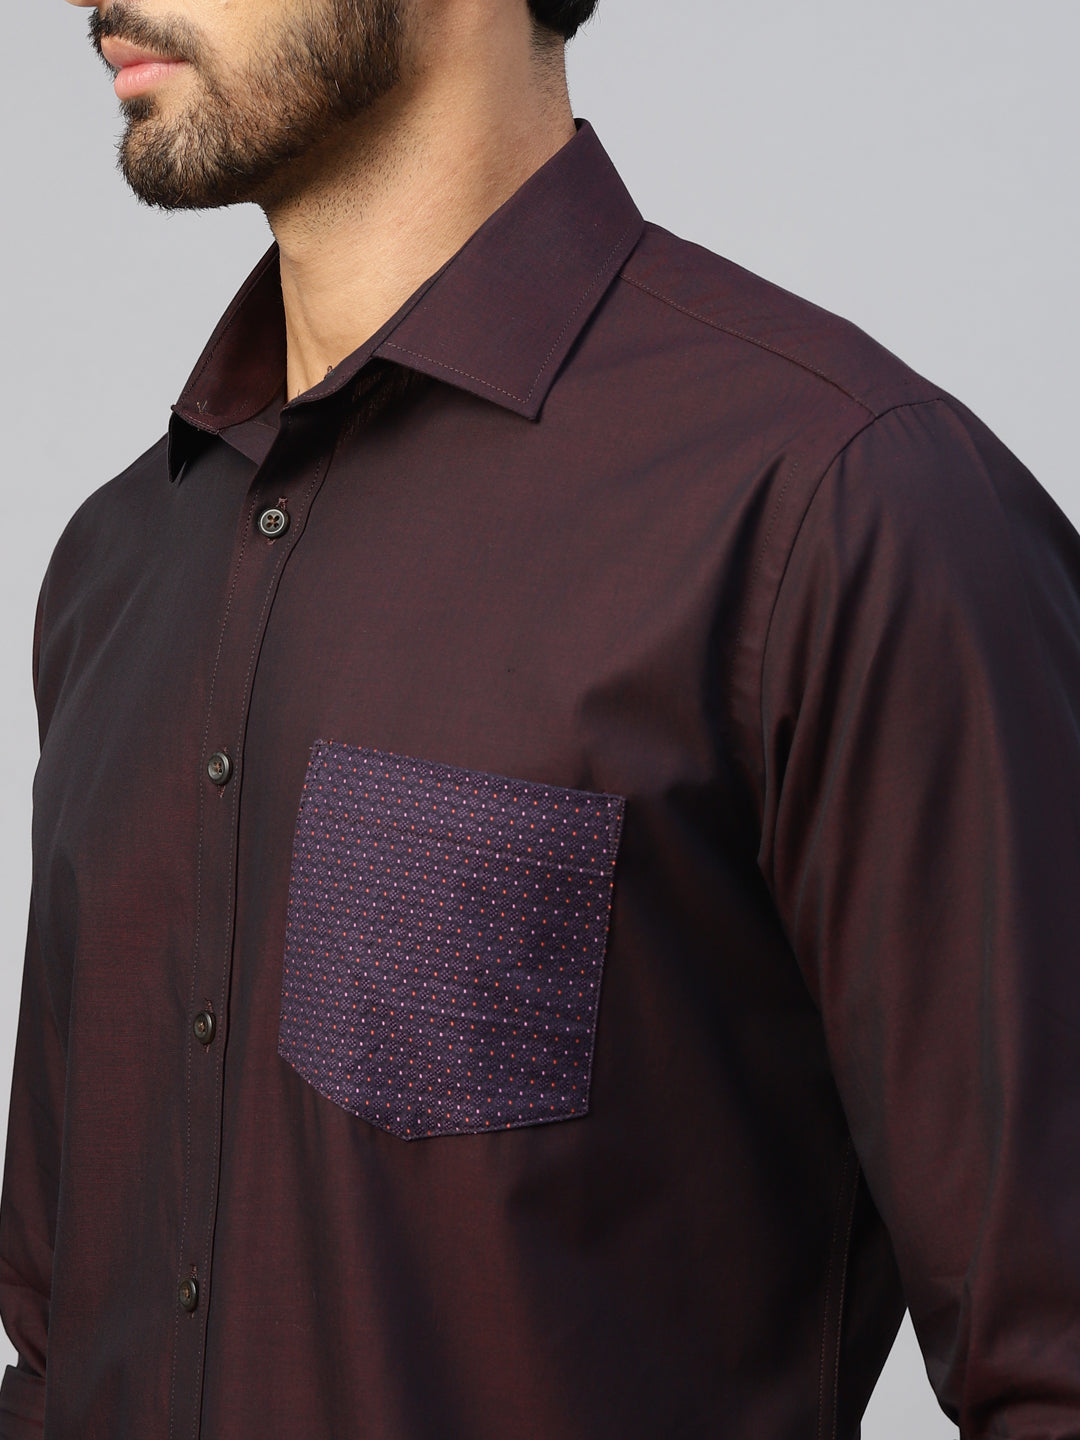 Don Vino Purple Slim Fit Shirt With Contrast Pockets for Men